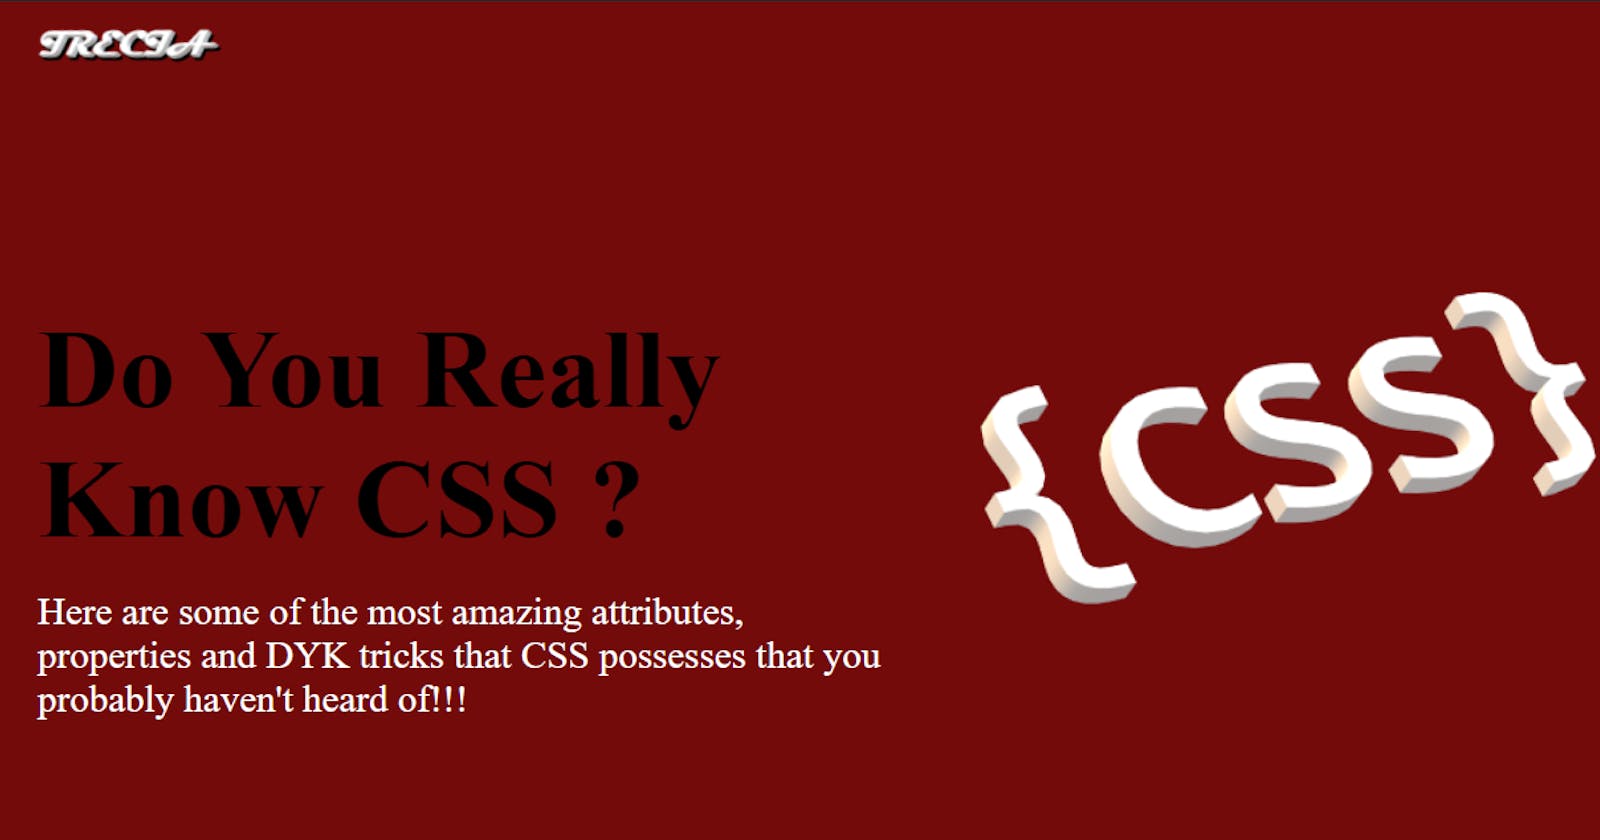 Do You Really Know CSS?